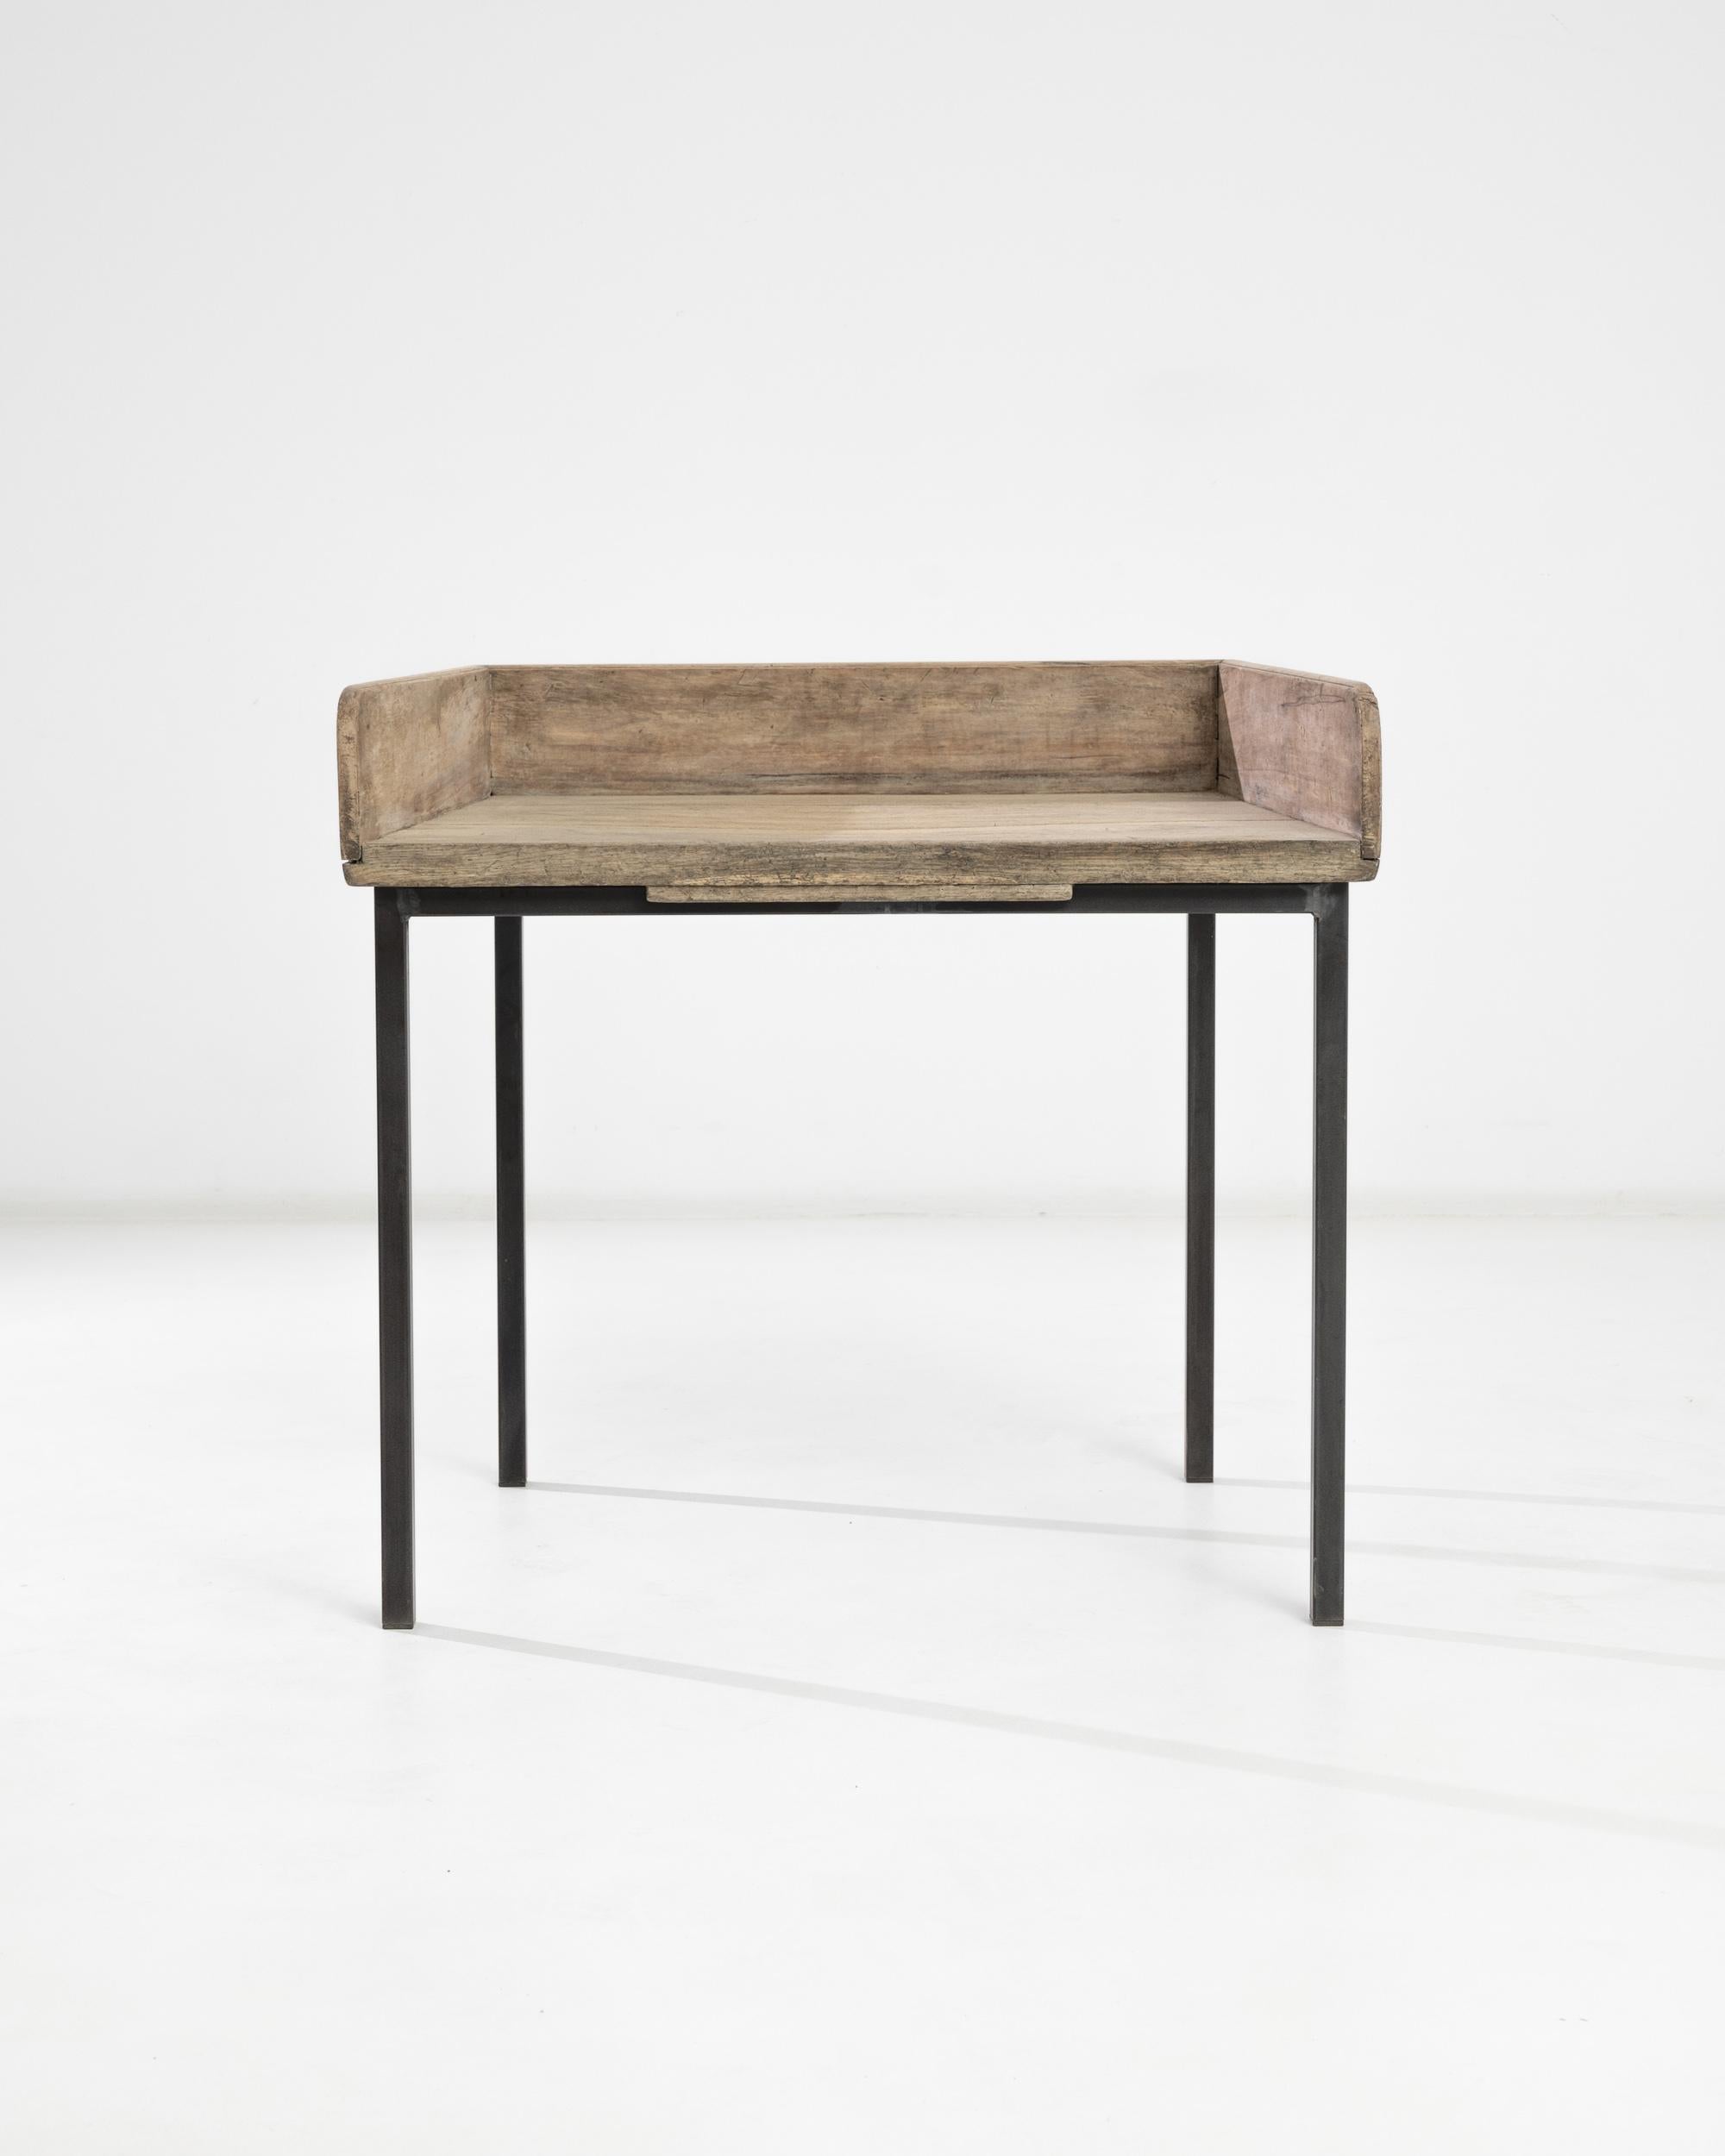 A 20th century wooden side table with a metal frame, from Central Europe. With a charmingly rustic wooden top perched on slim metal legs, this side table presents a versatile profile. Originally contrasting, the minimalist metal design and soft